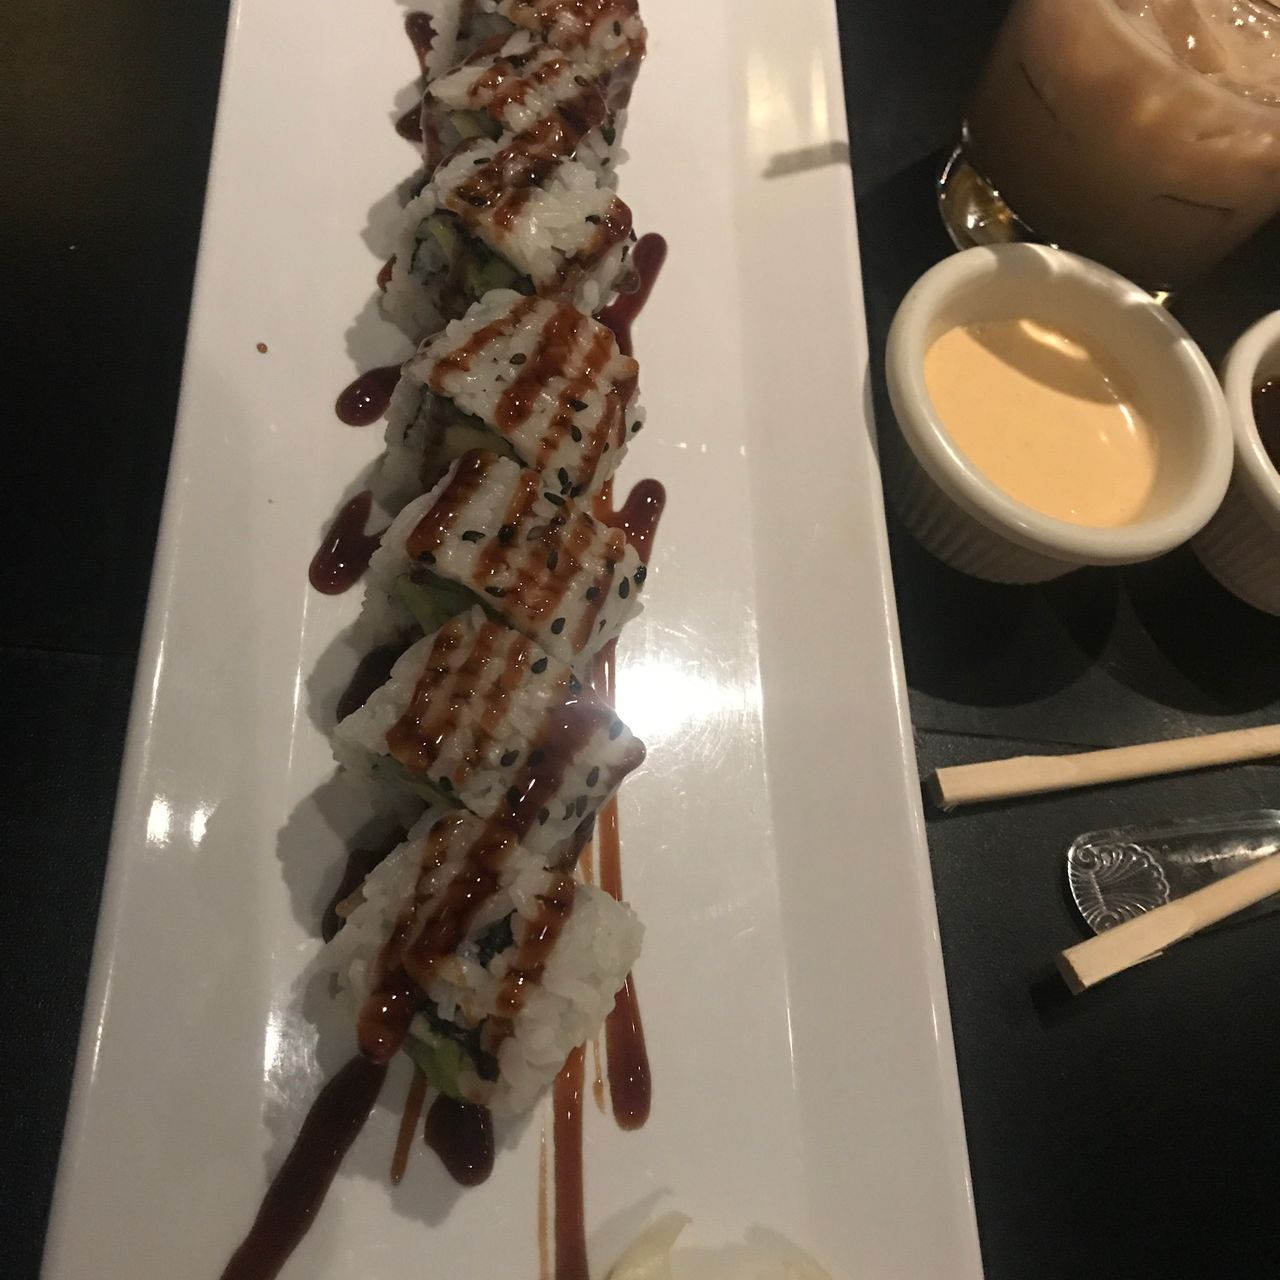 This Place in Yakima sells Deep Fried Sushi Rolls, and They're Amazing